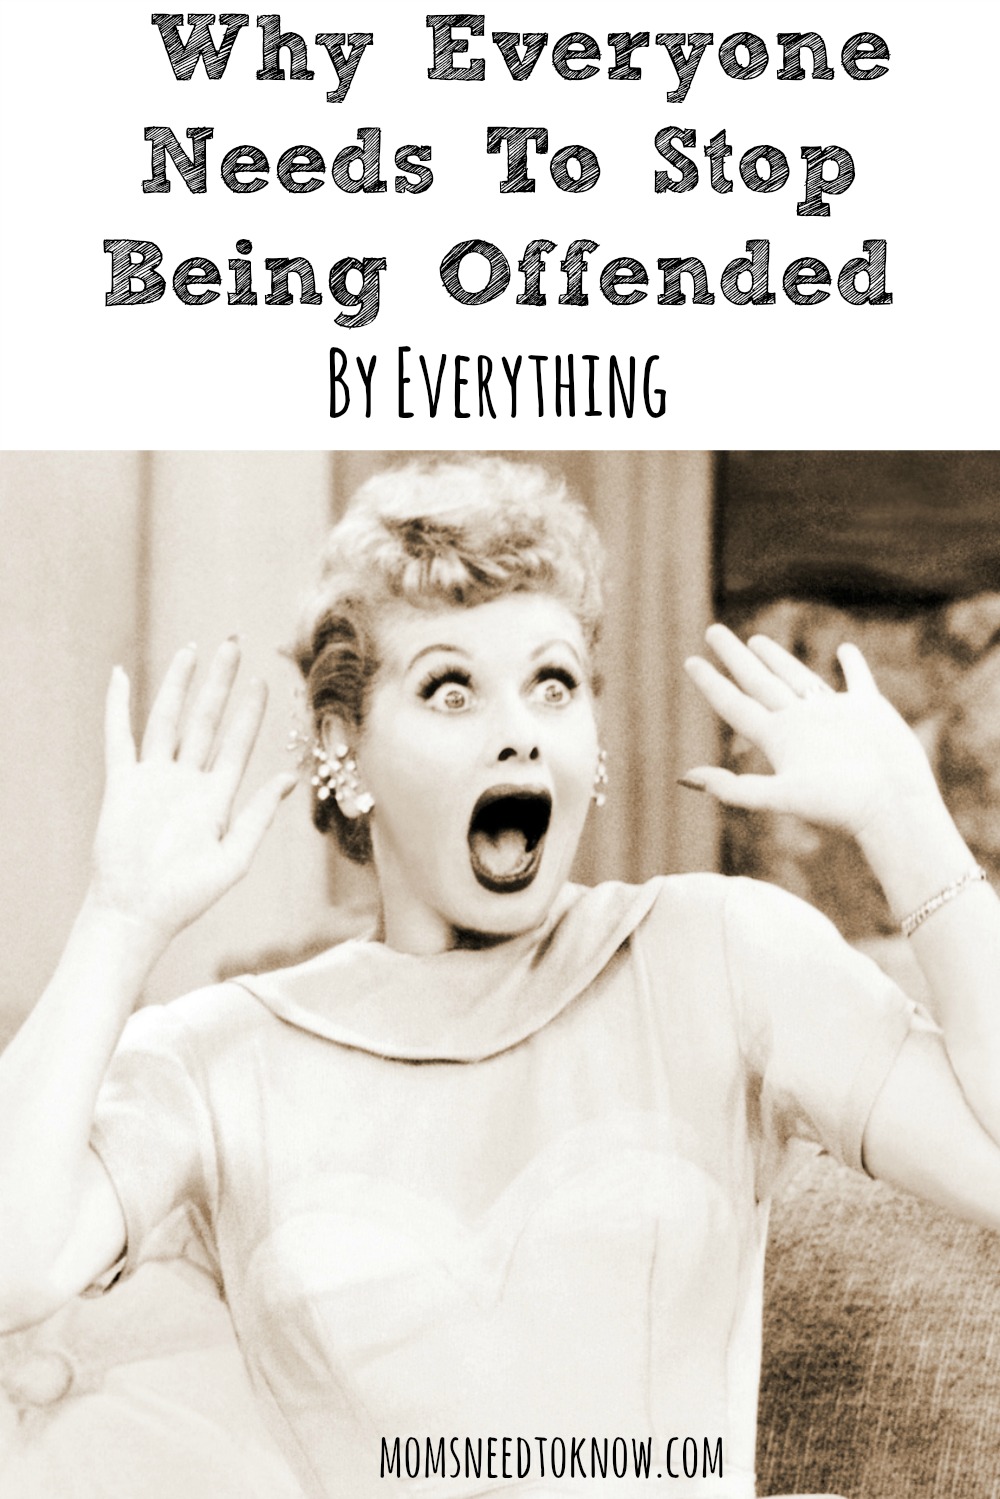 These days, it looks like everyone is just looking for a reason to start a boycott...but here is why you need to stop being offended by everything!